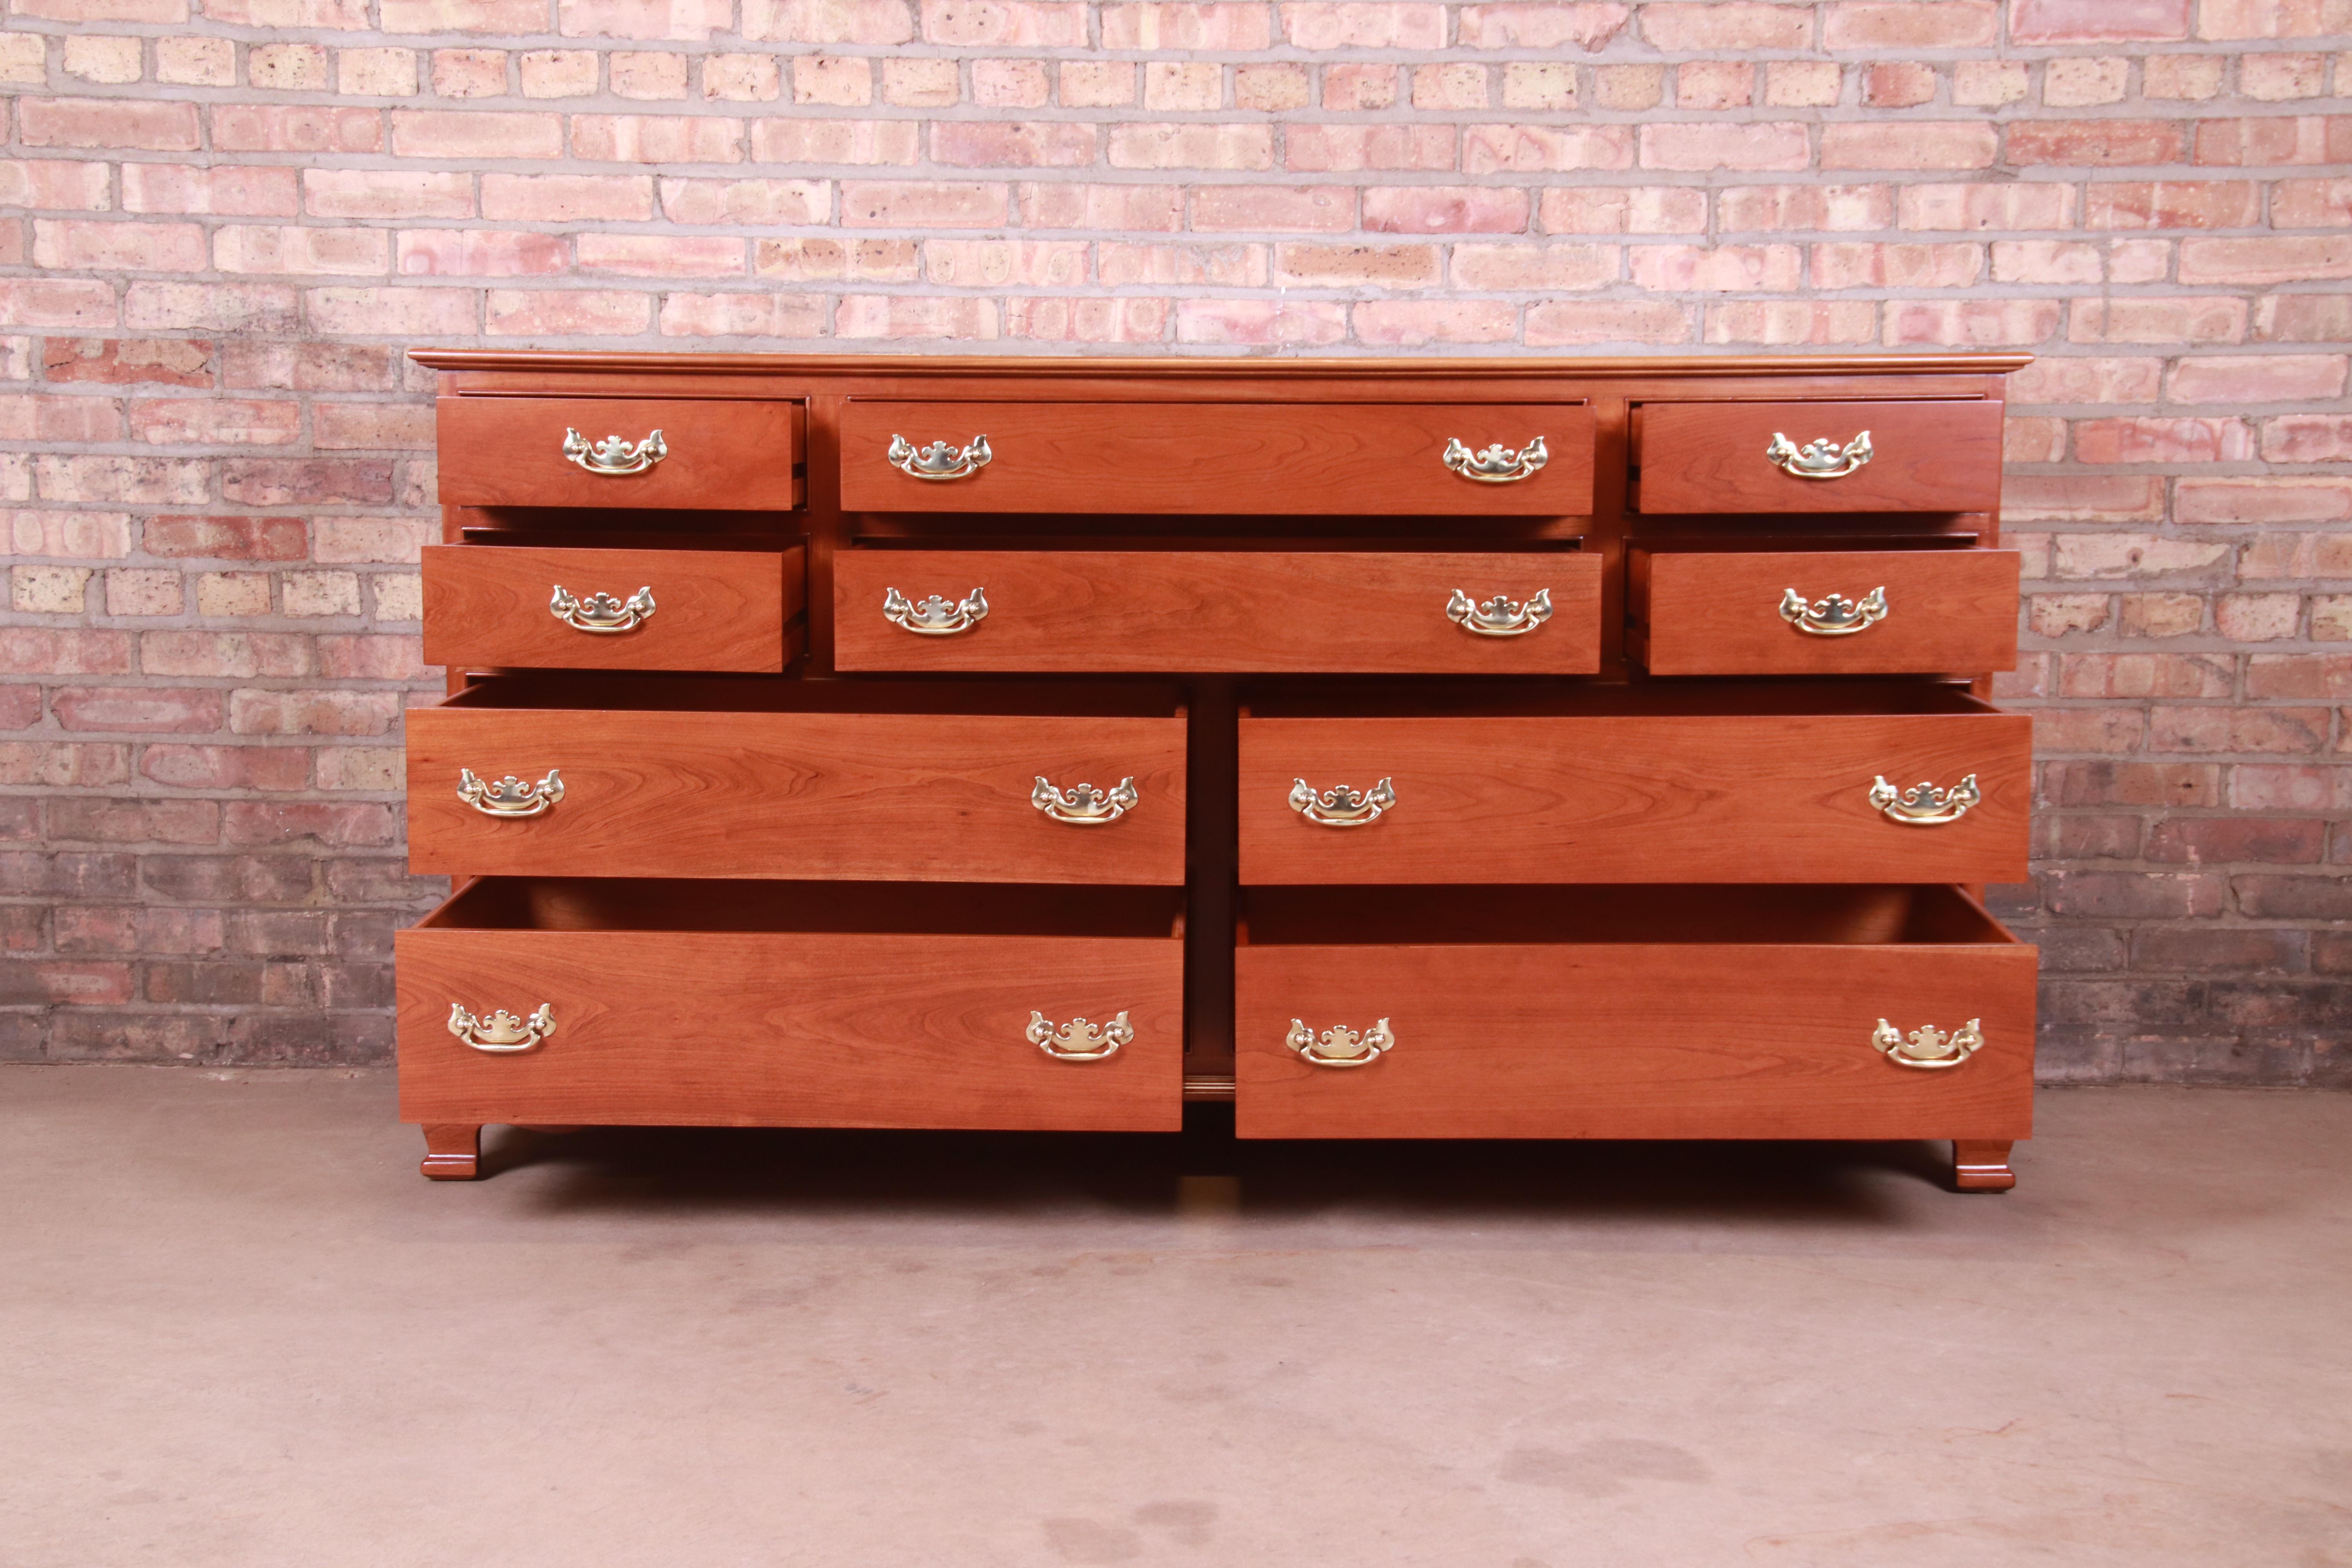 20th Century Stickley American Colonial Solid Cherry Wood Ten-Drawer Dresser, Refinished